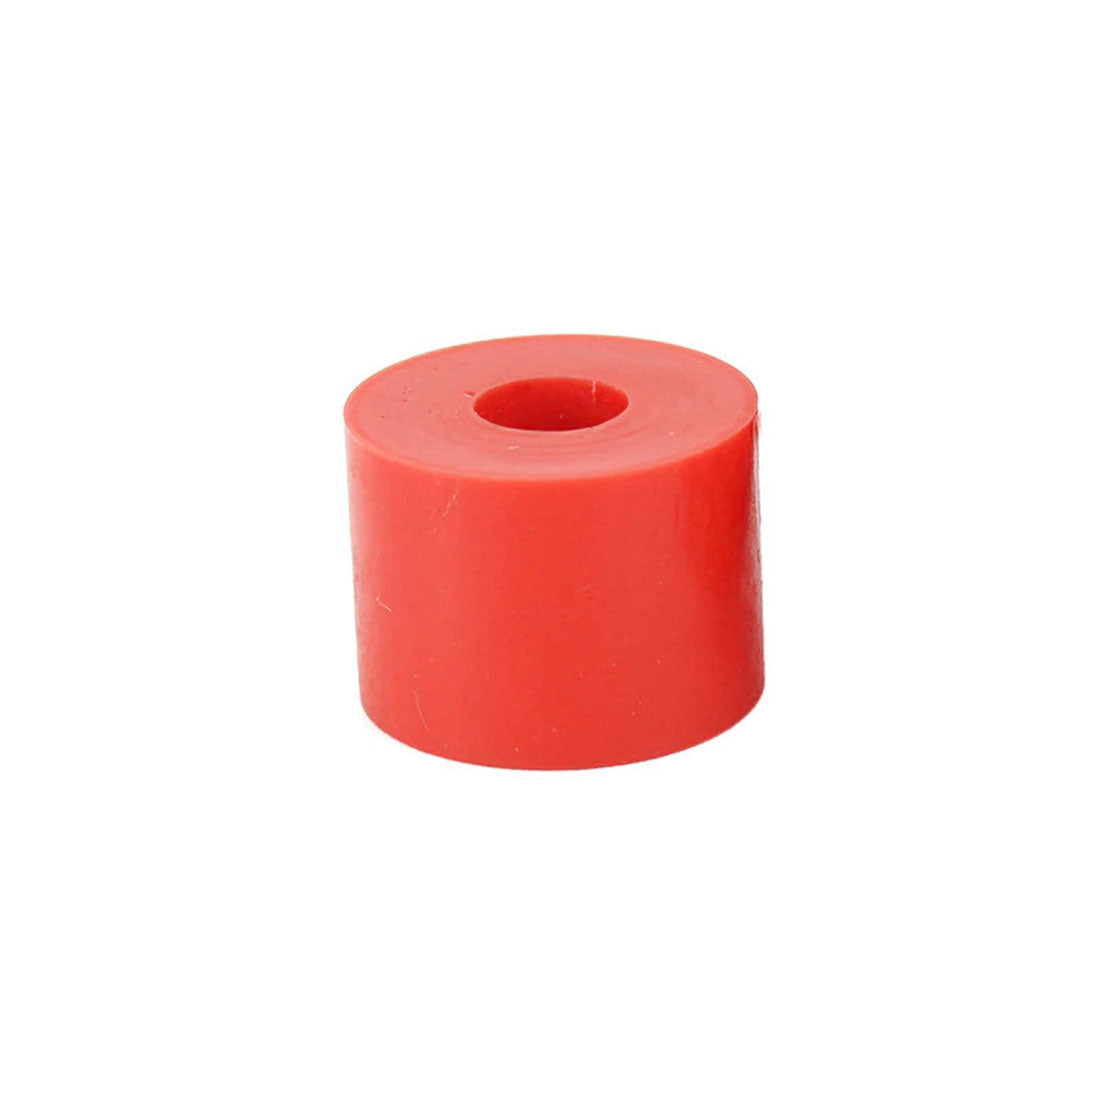 ABEC 11 Reflex Barrel Bushing - Single .750&quot; 92a - Red Skateboard Hardware and Parts